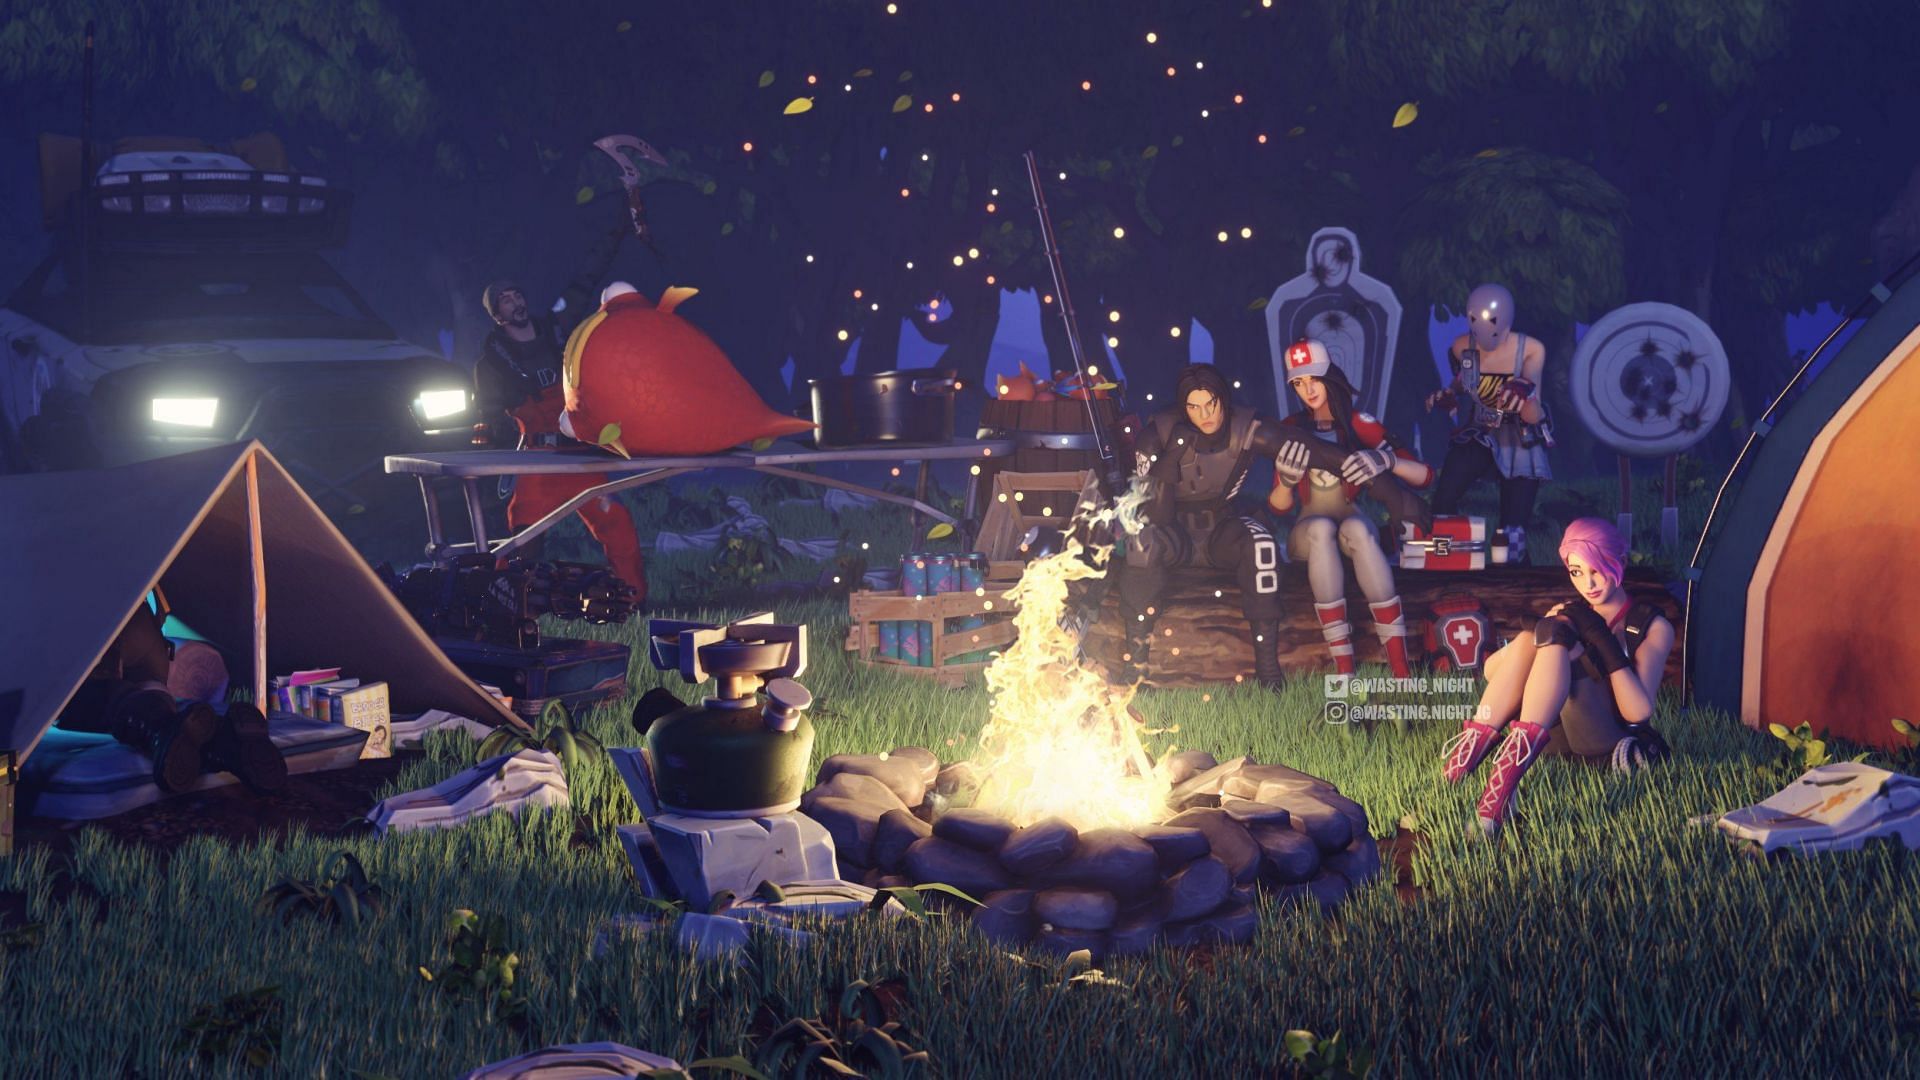 Campfires in Fortnite warm the body and the soul (Image via Twitter/Wasting_Night)